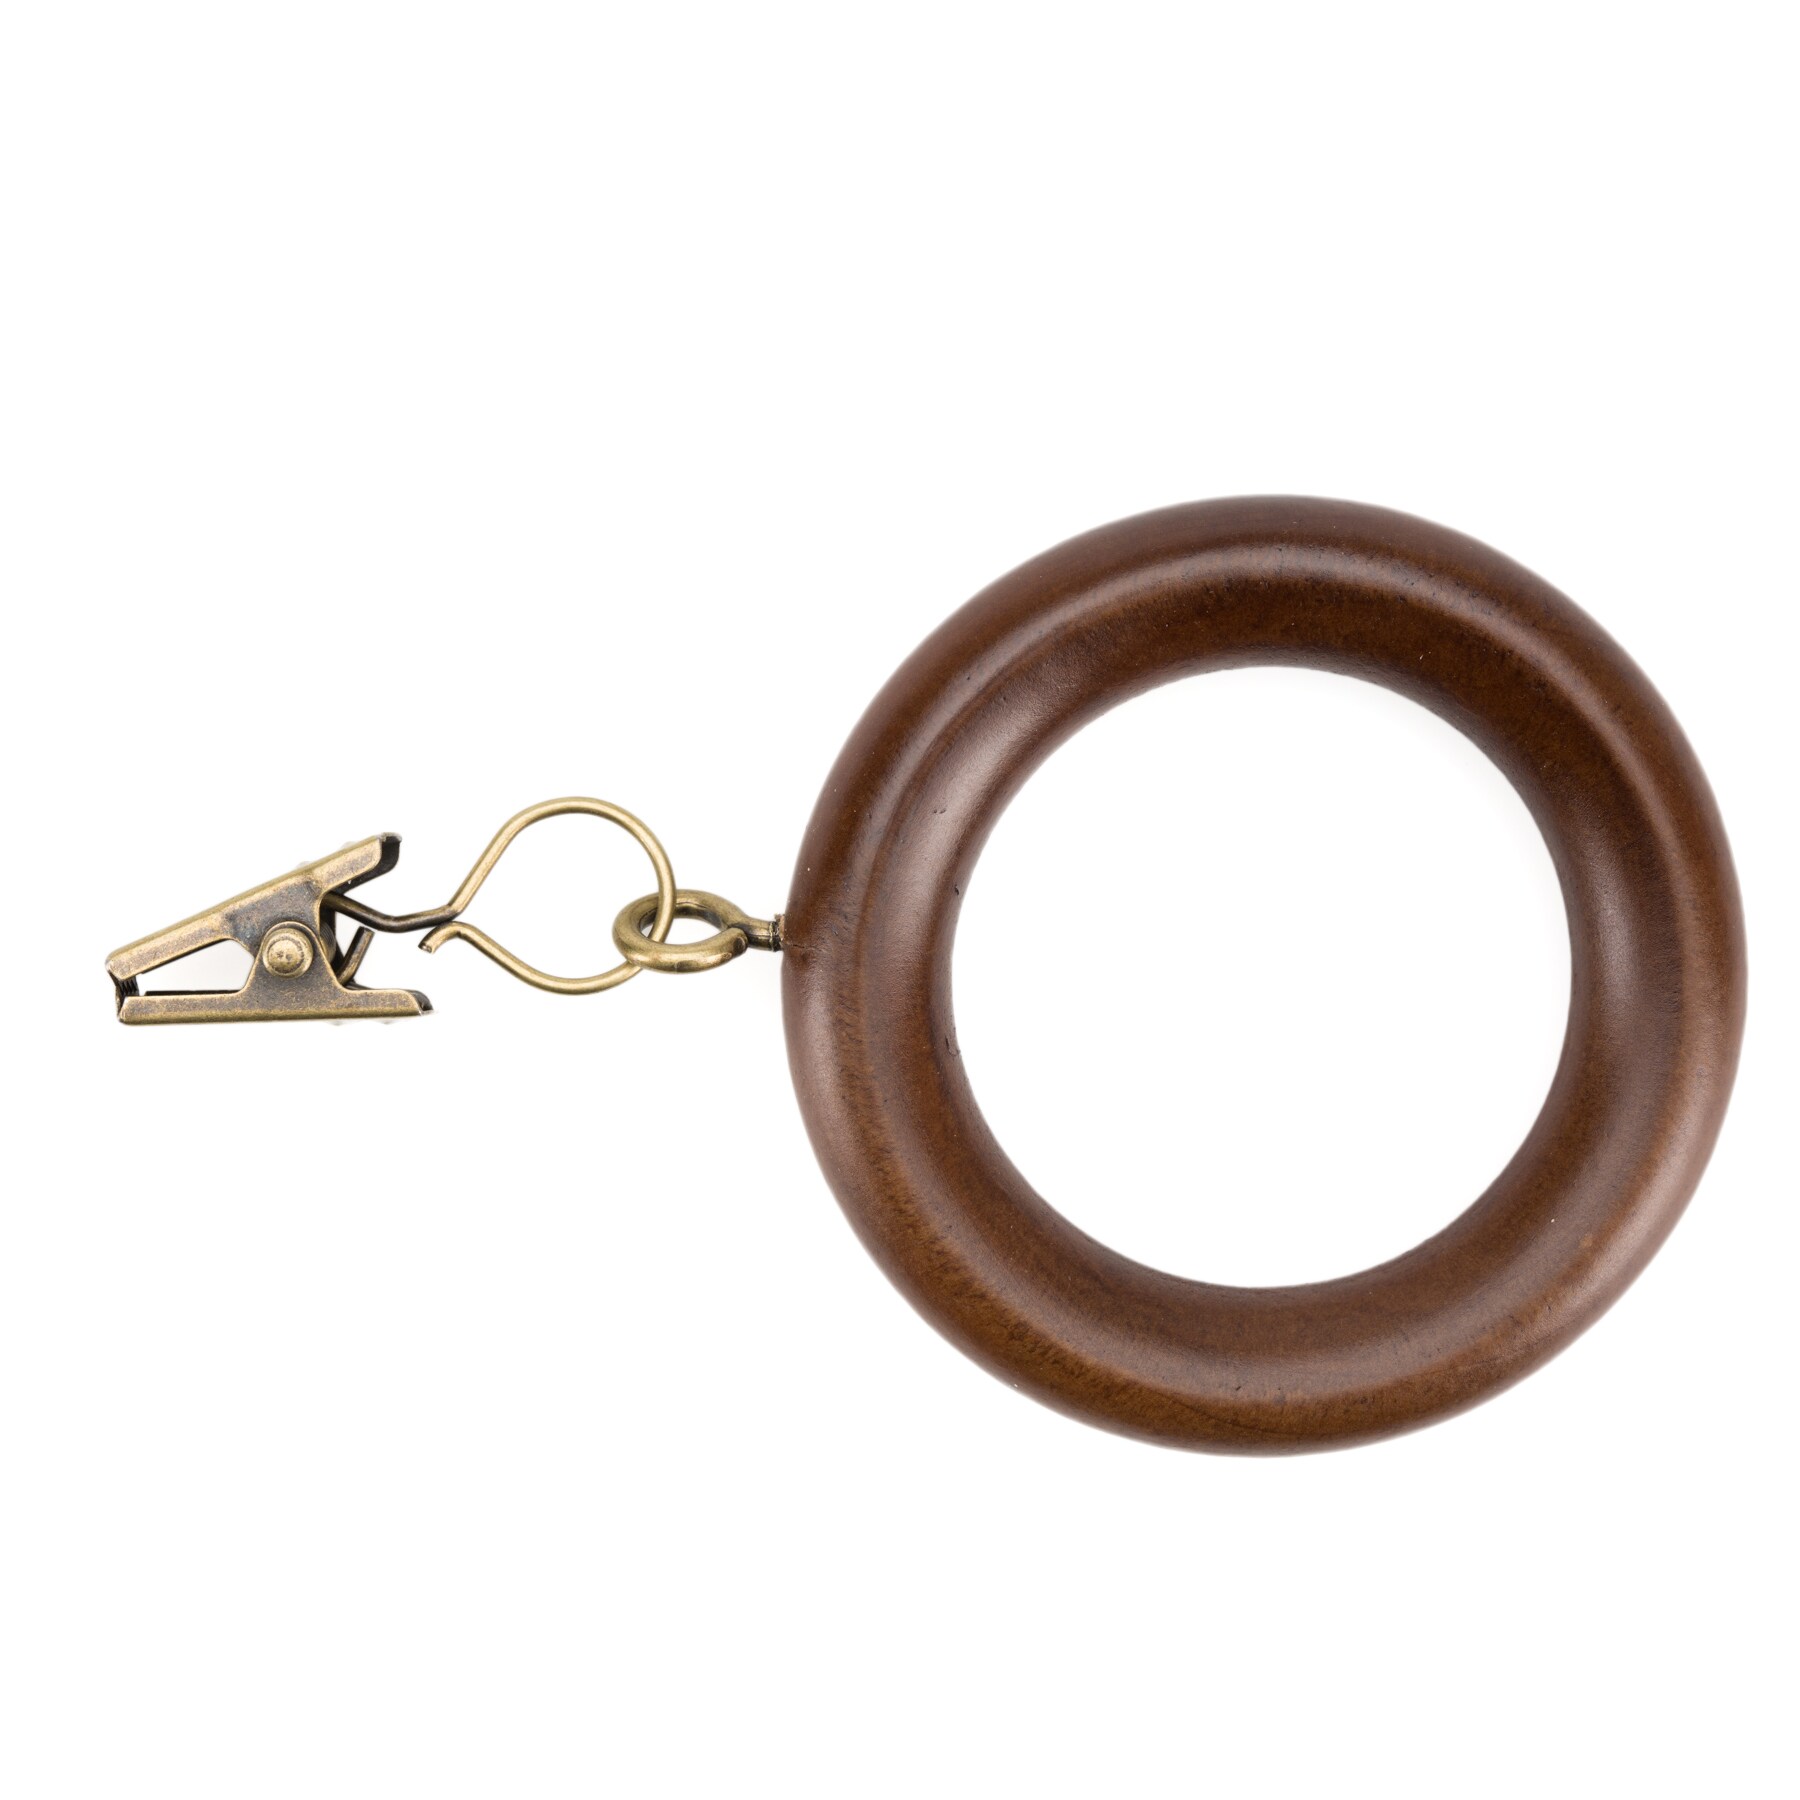 Boho Chic Brown Wood 13 Wooden Curtain Rings with Round Eye fits 1 3/4” rod. 